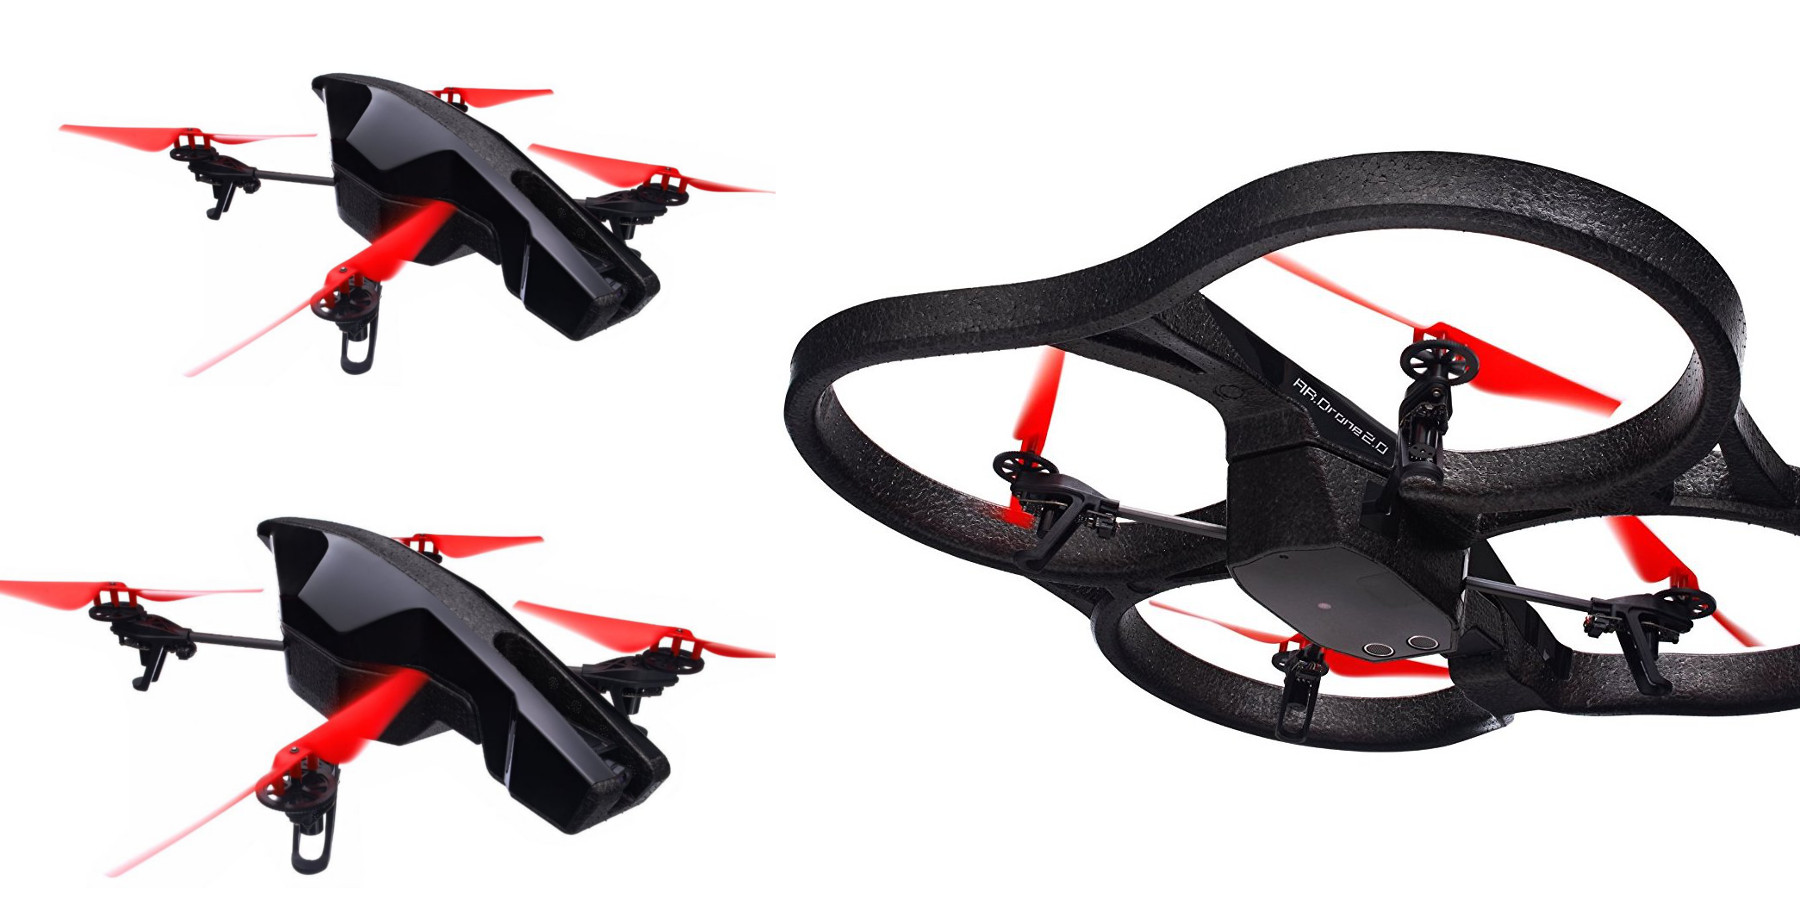 Ordsprog plade kupon Parrot's AR. 2.0 Power Edition Quadricopter Drone is now available at its  Amazon all-time low for $170 shipped (Reg. $270+)